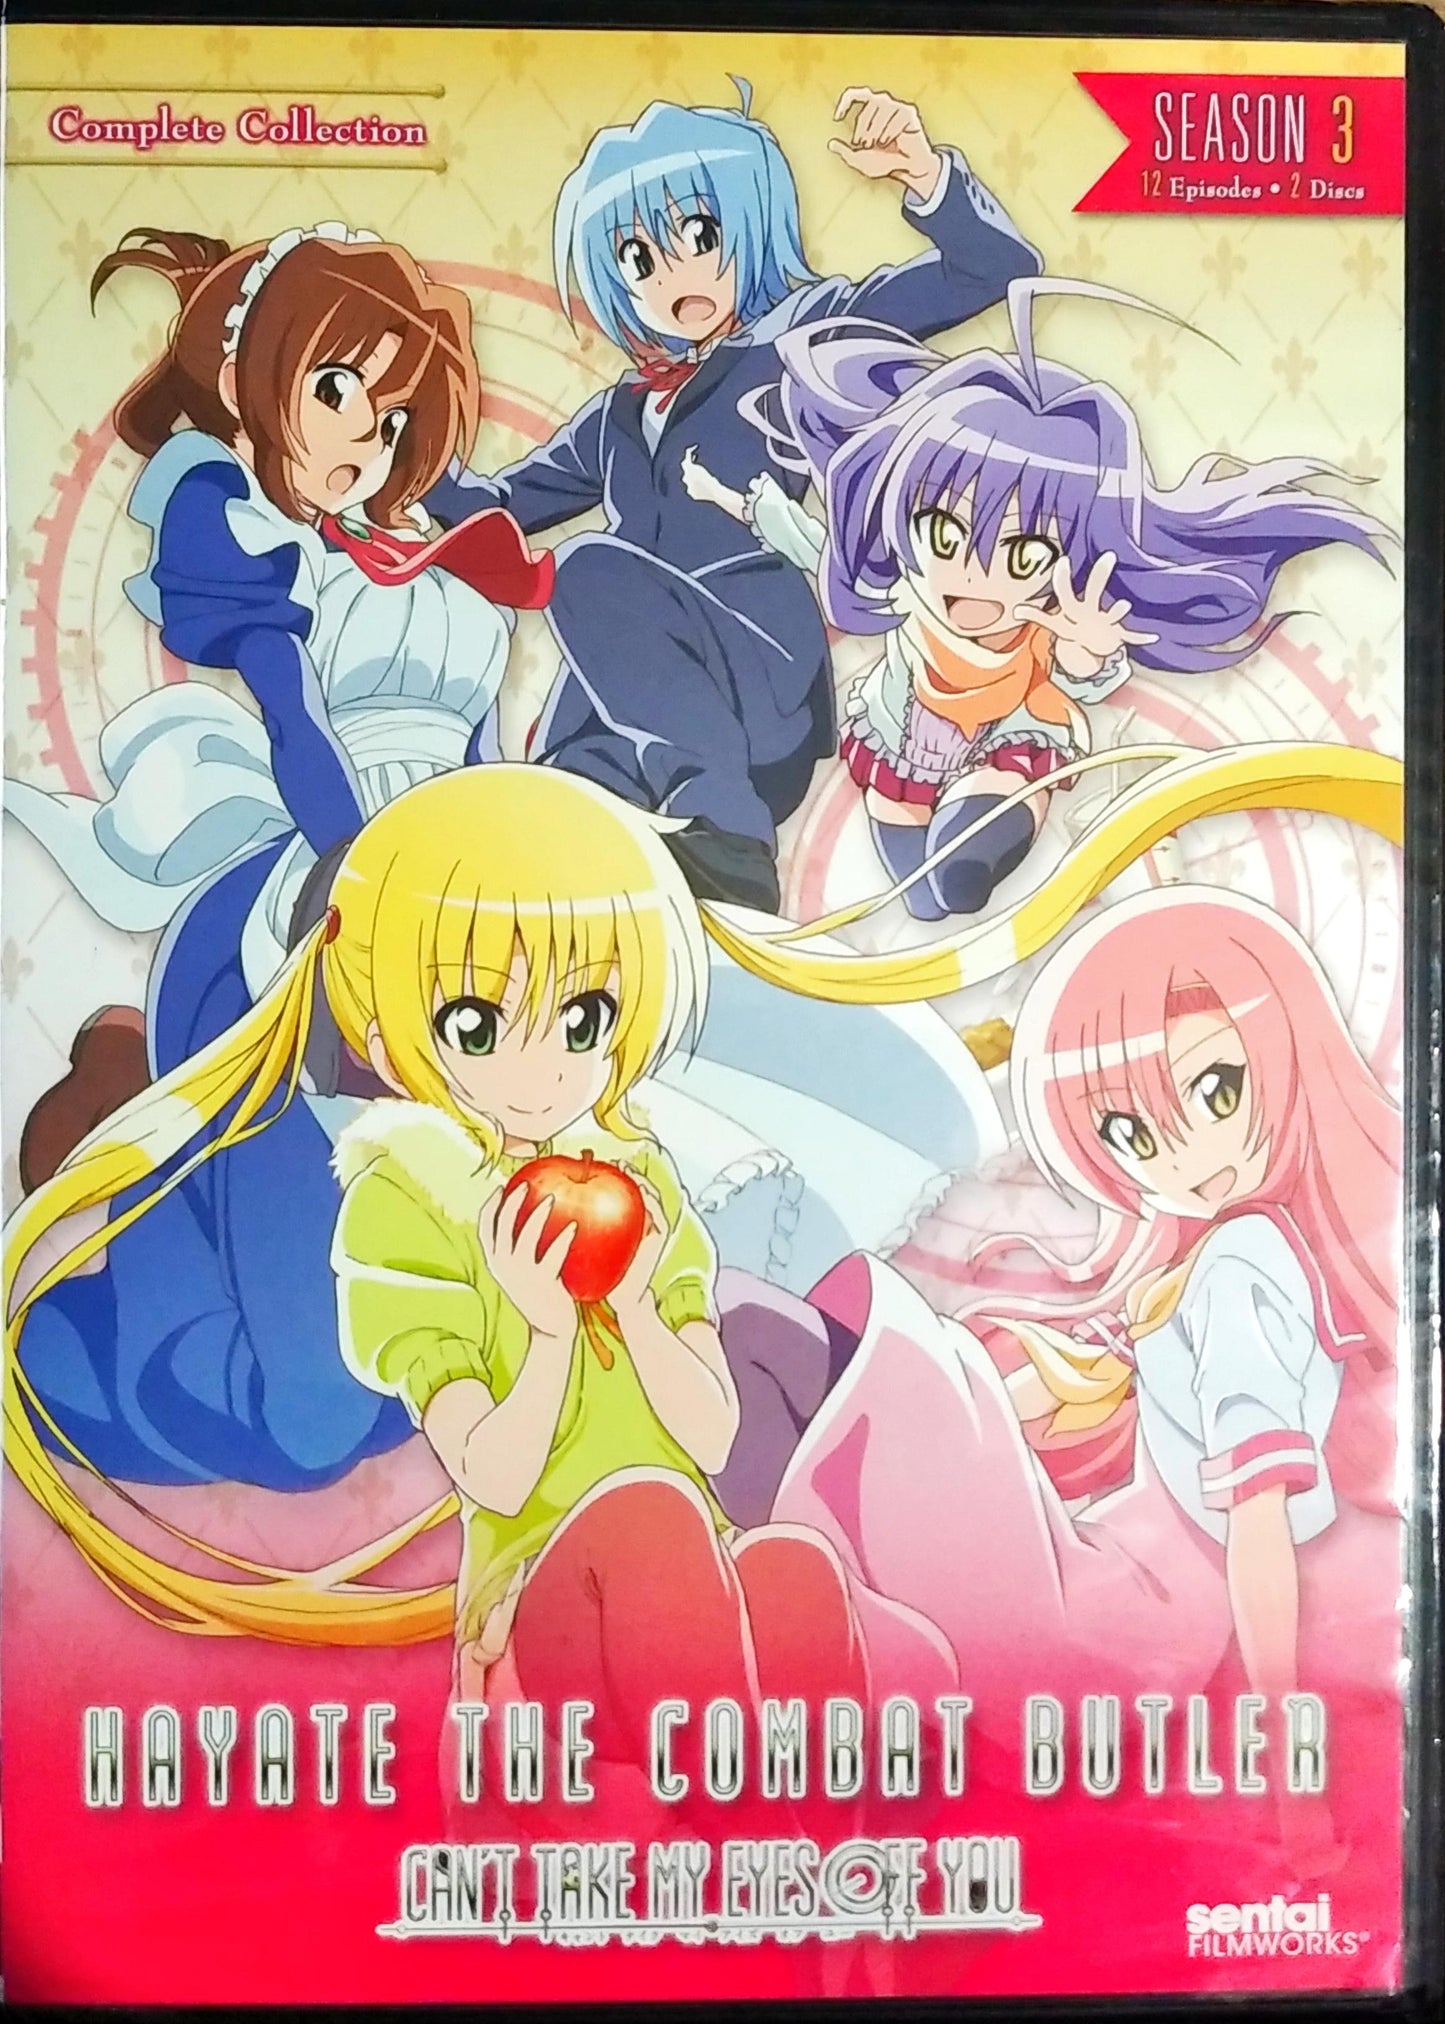 Hayate the Combat Butler Season 3 Can't Take My Eyes Off You DVD Complete Collection Sealed